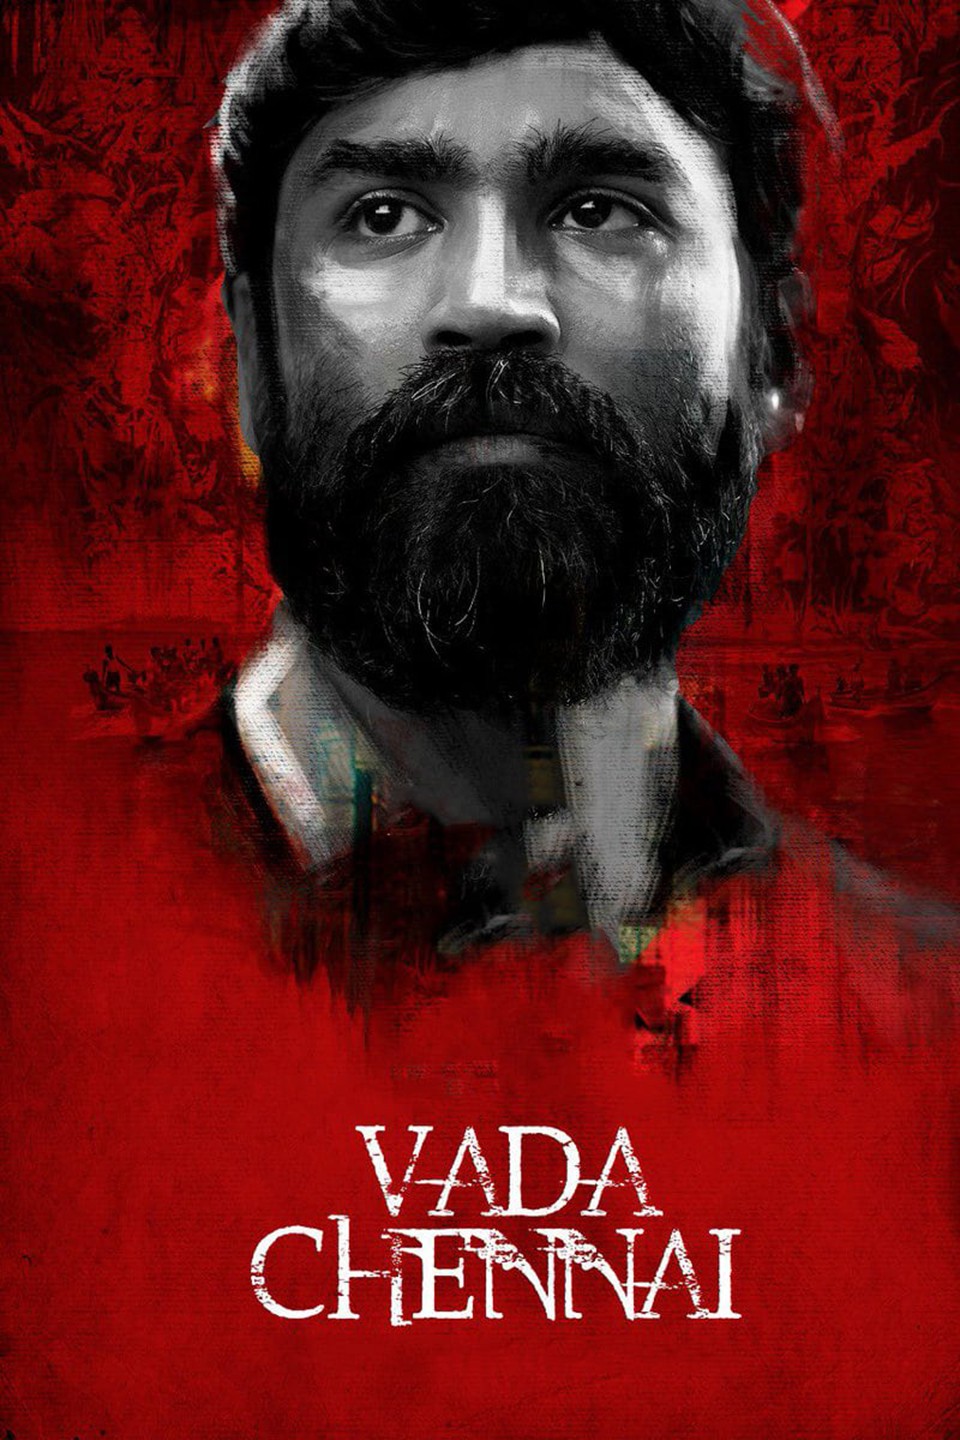 Just found the reason why people want to watch the full version of  Vadachennai : r/kollywood